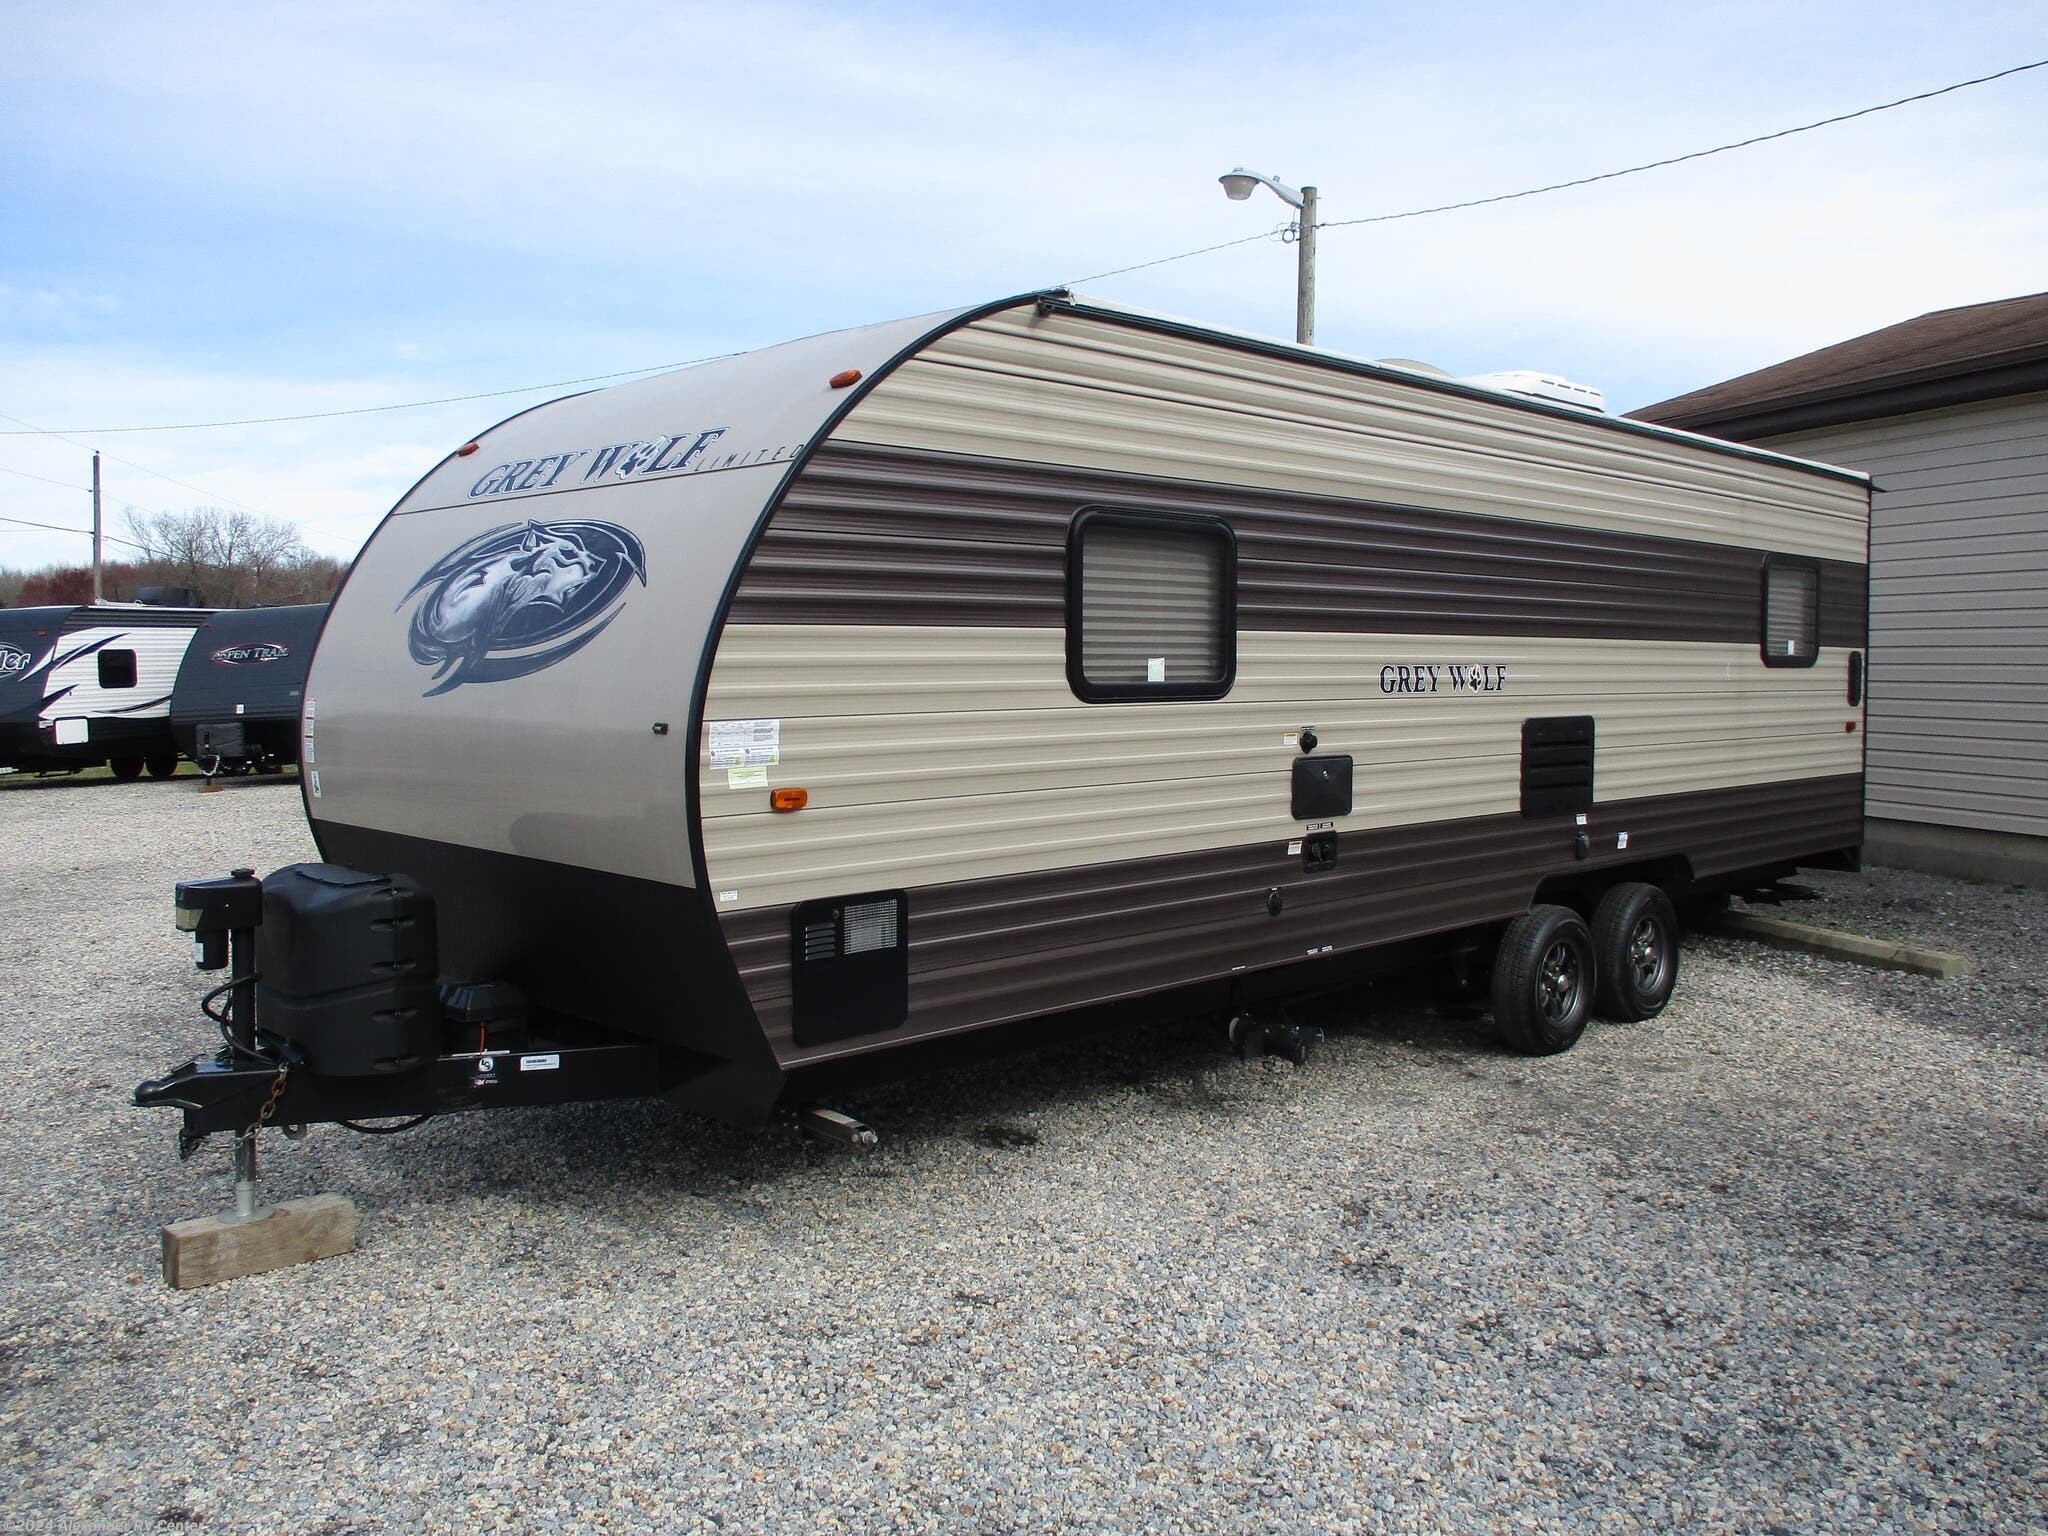 2017 Forest River RV Cherokee Grey Wolf 22-RR for Sale in Clayton, DE 19938 | 040415 | RVUSA.com 2017 Forest River Cherokee Grey Wolf Limited